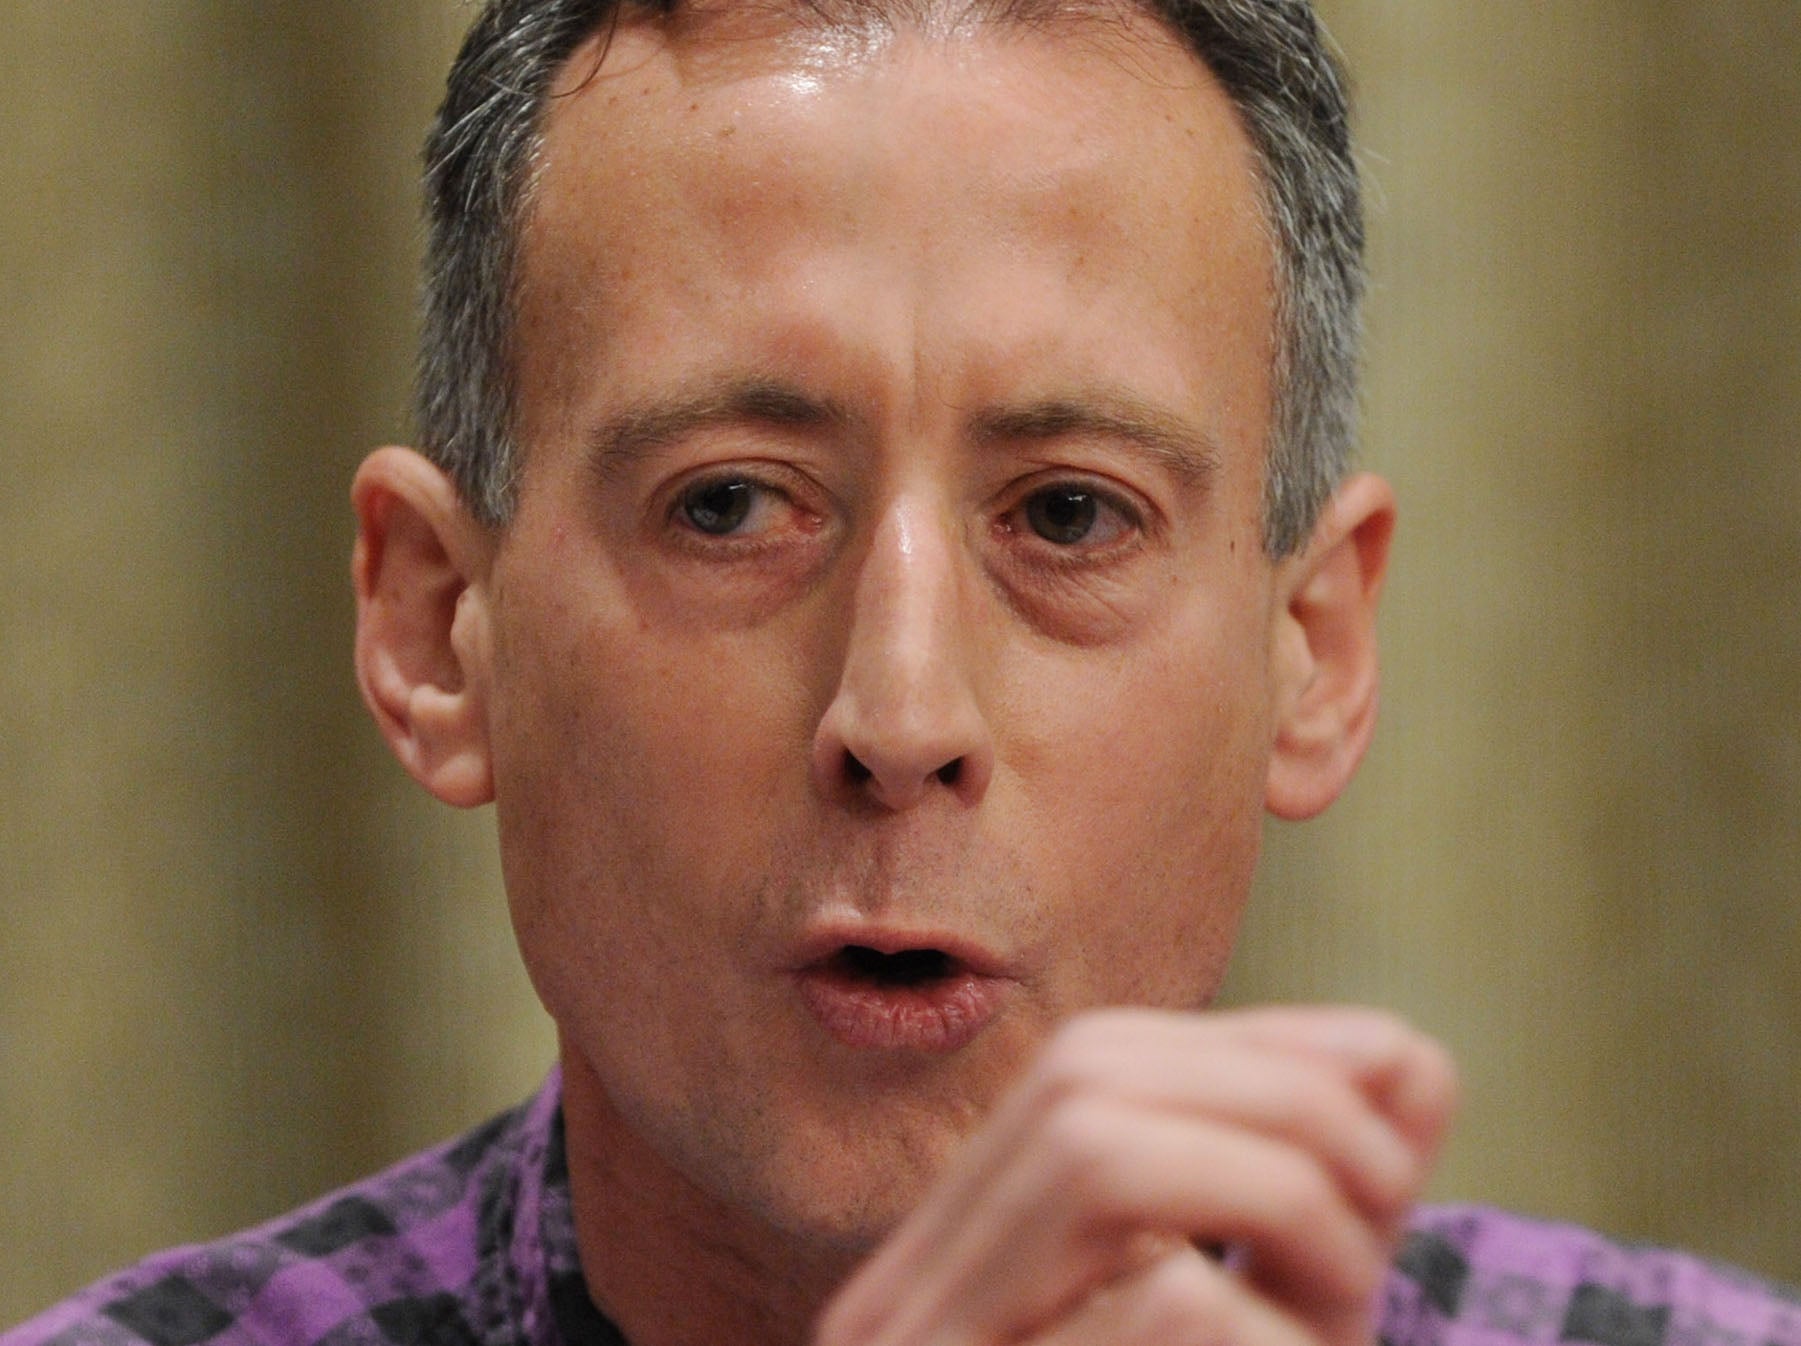 Peter Tatchell says Saudi Arabia and Isis are 'two sides of the same coin'